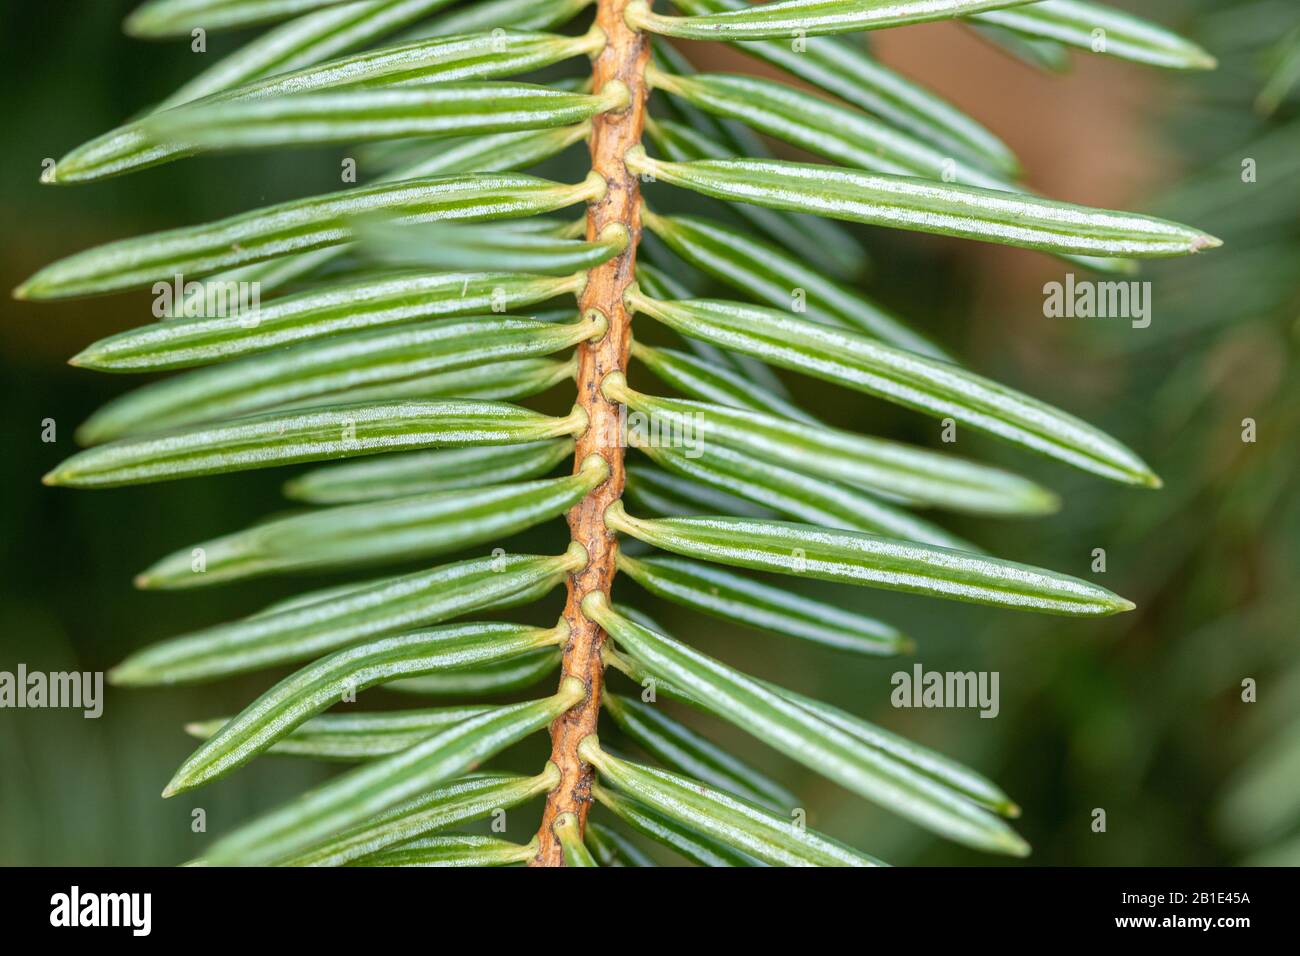 Close-up view of leaves (needles) of Abies alba, the European silver fir or silver fir Stock Photo